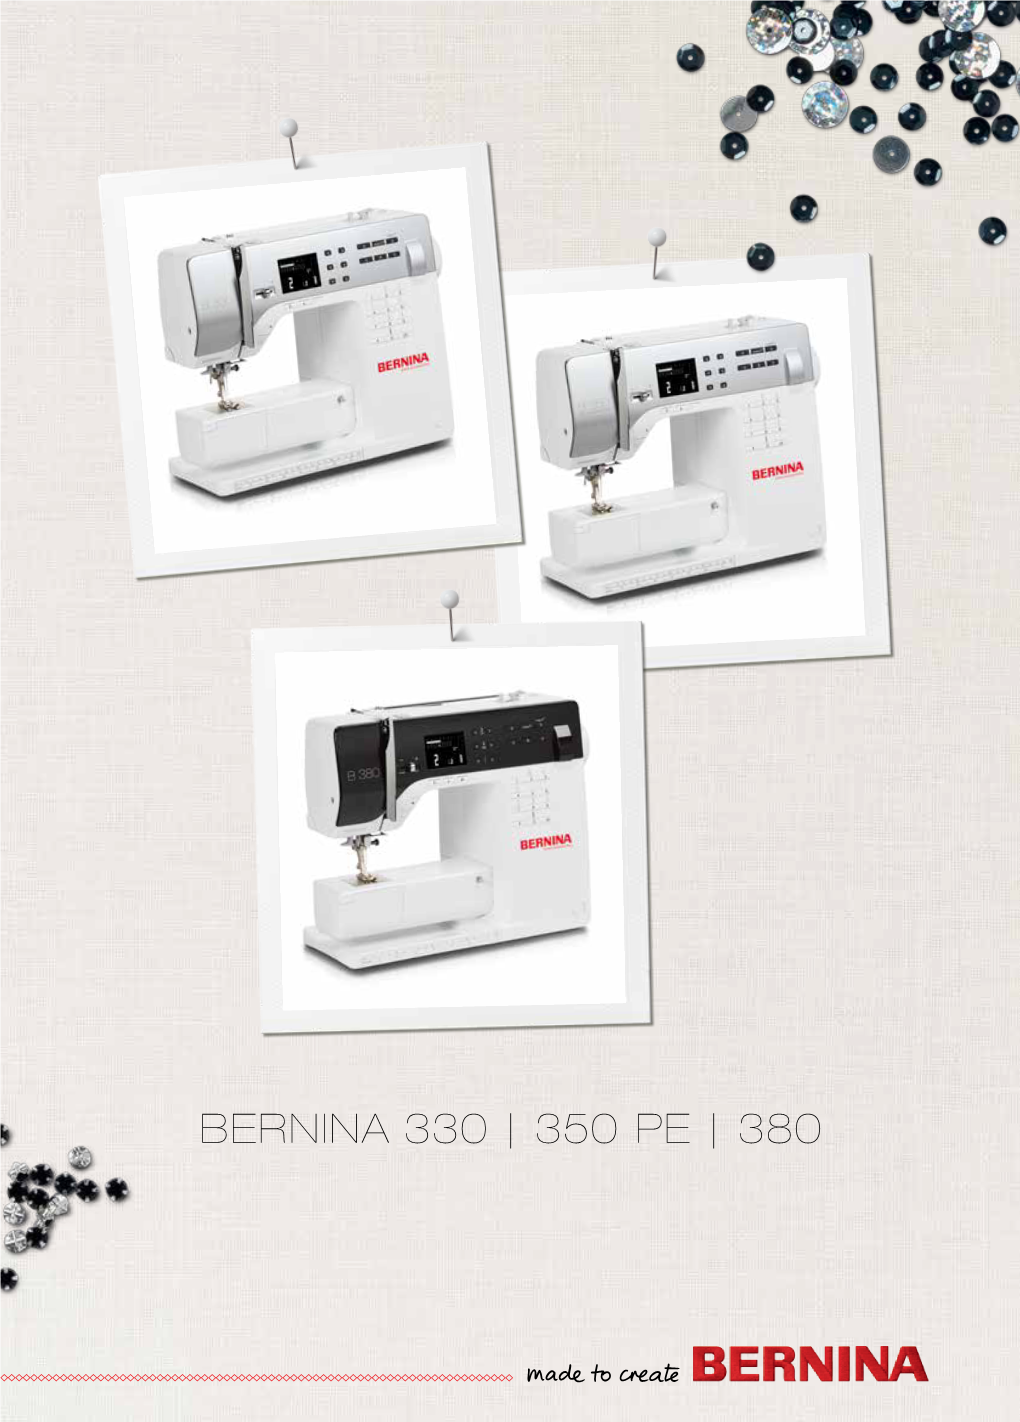 BERNINA 330 | 350 PE | 380 LOOKING for a NEW SEWING PROJECT? You Can Find What You Want in “Inspiration”, Our Sewing Magazine